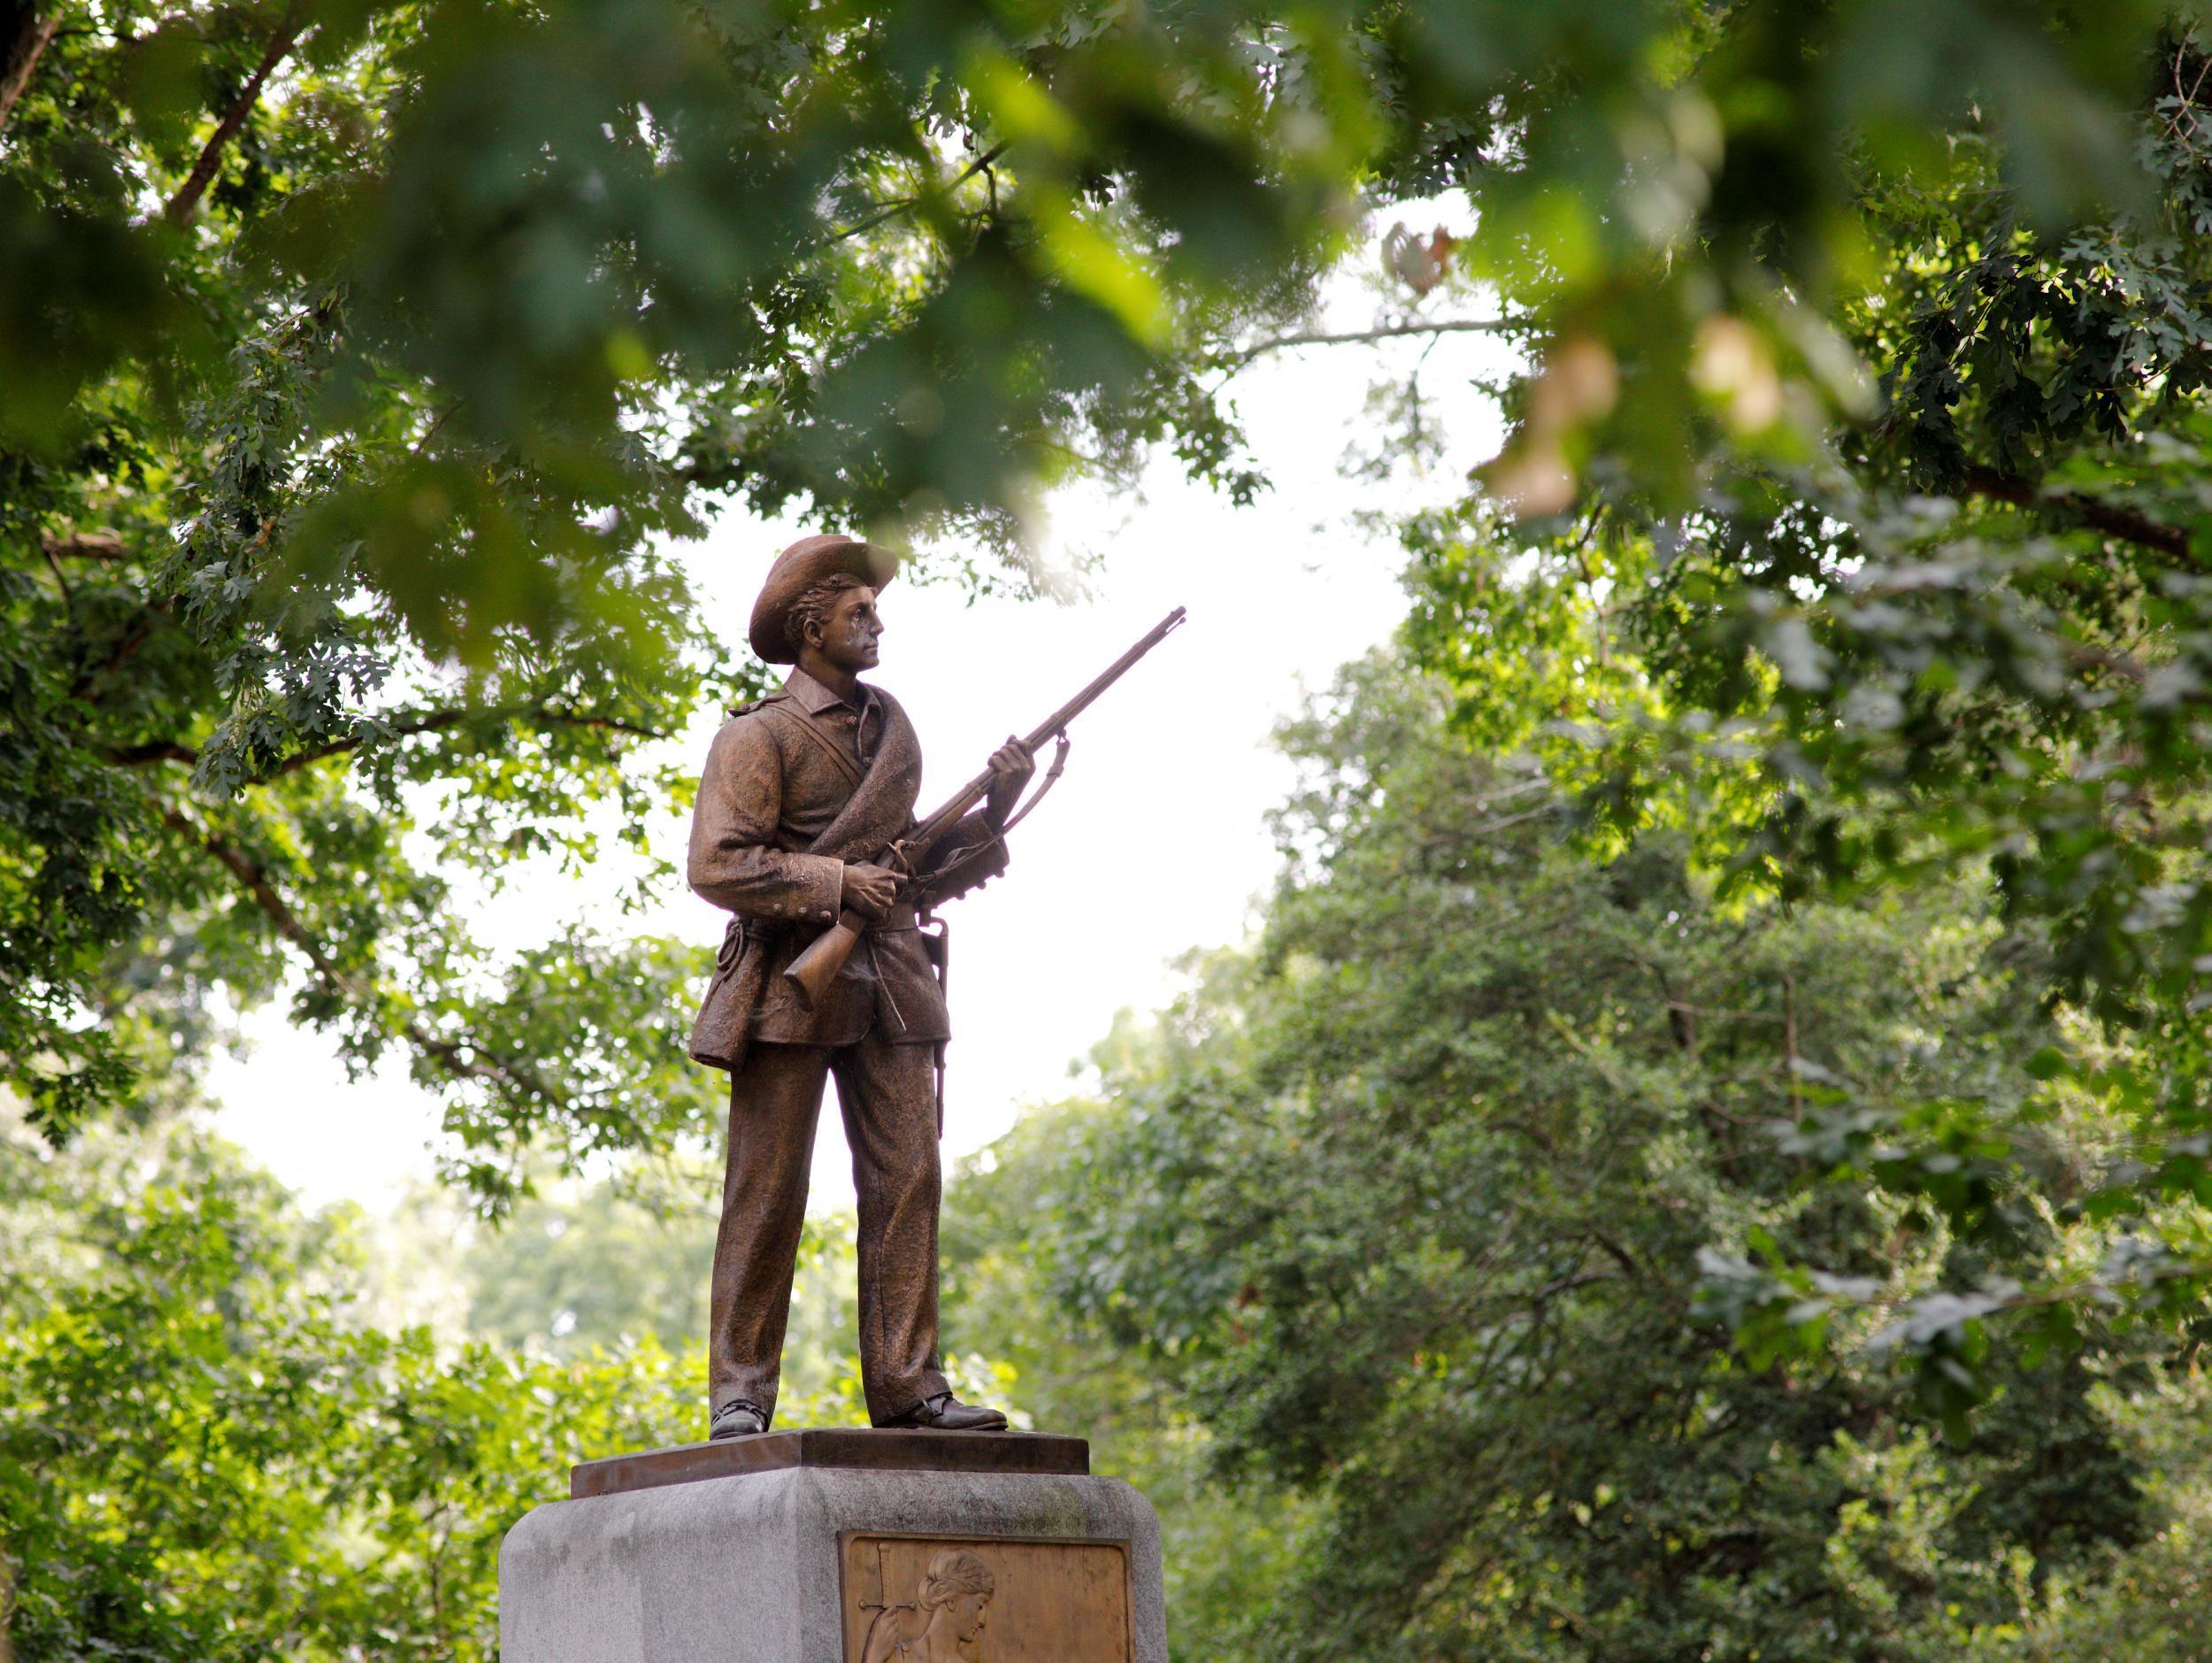 Confederate statue of a soldier "Silent Sam" stands on the campus of the University of North Carolina, US